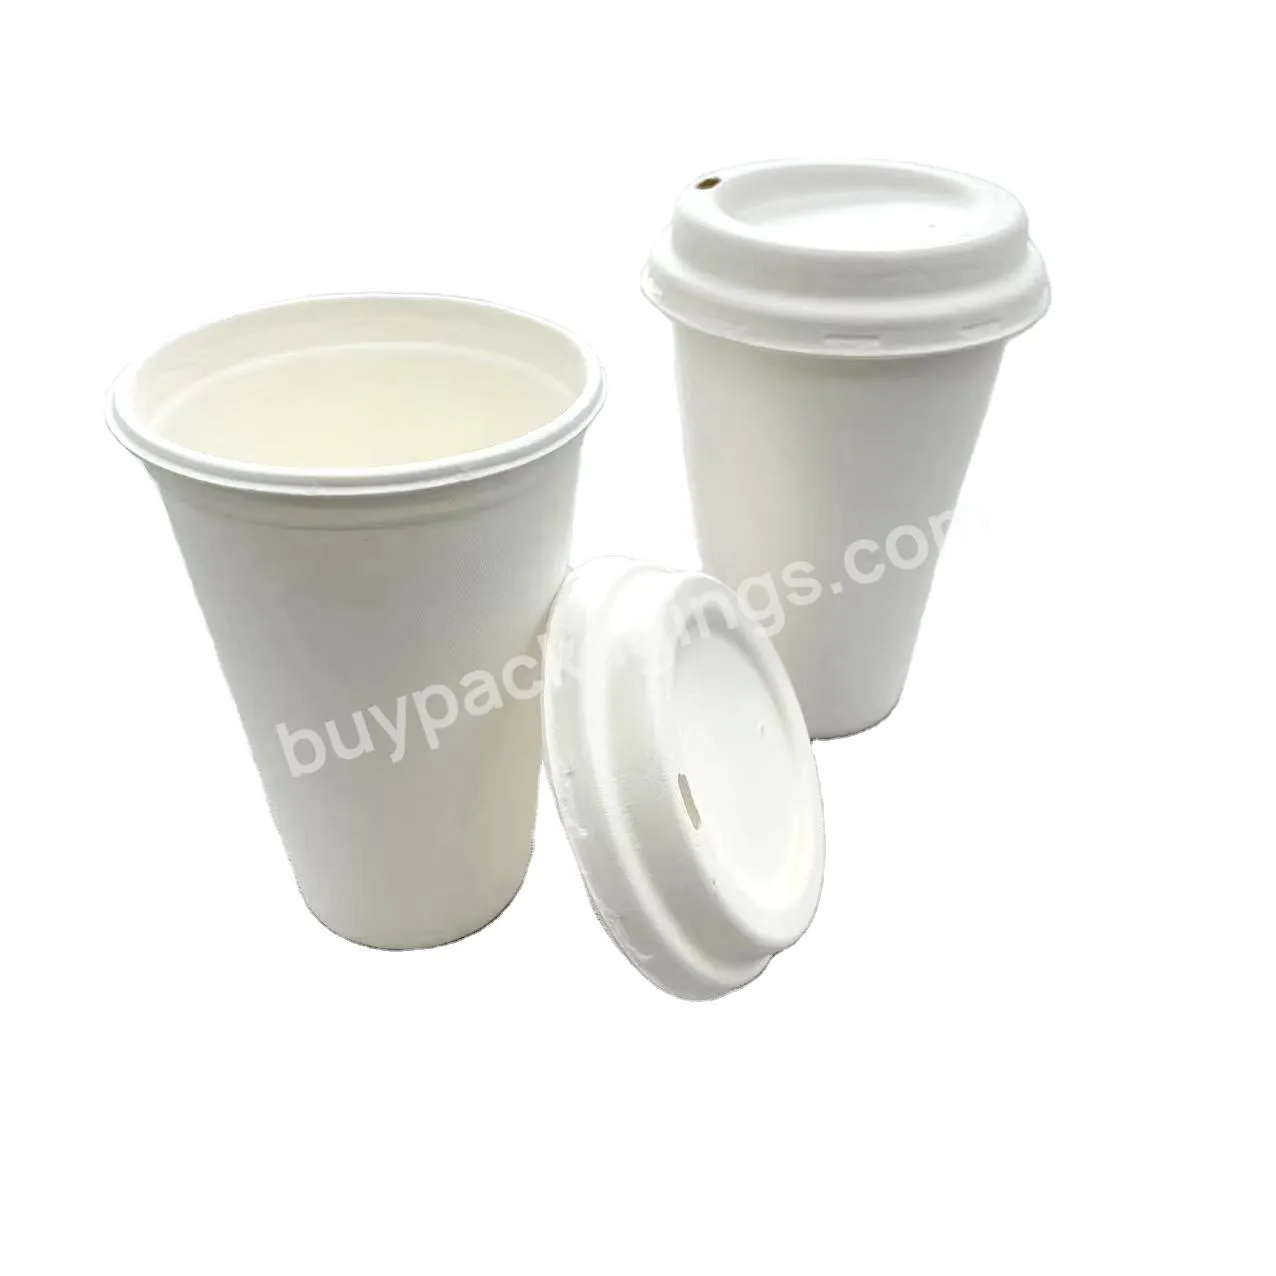 Bamboo Bagasse Fiber 100% Biodegradable Disposable Cafe Coffee Drinkware Paper Cup For Hot And Cold Drinks - Buy Biodegradable Disposable Cafe Coffee Paper Cup,Drinkware Paper Cup,Biodegradable Paper Coffee Cup.